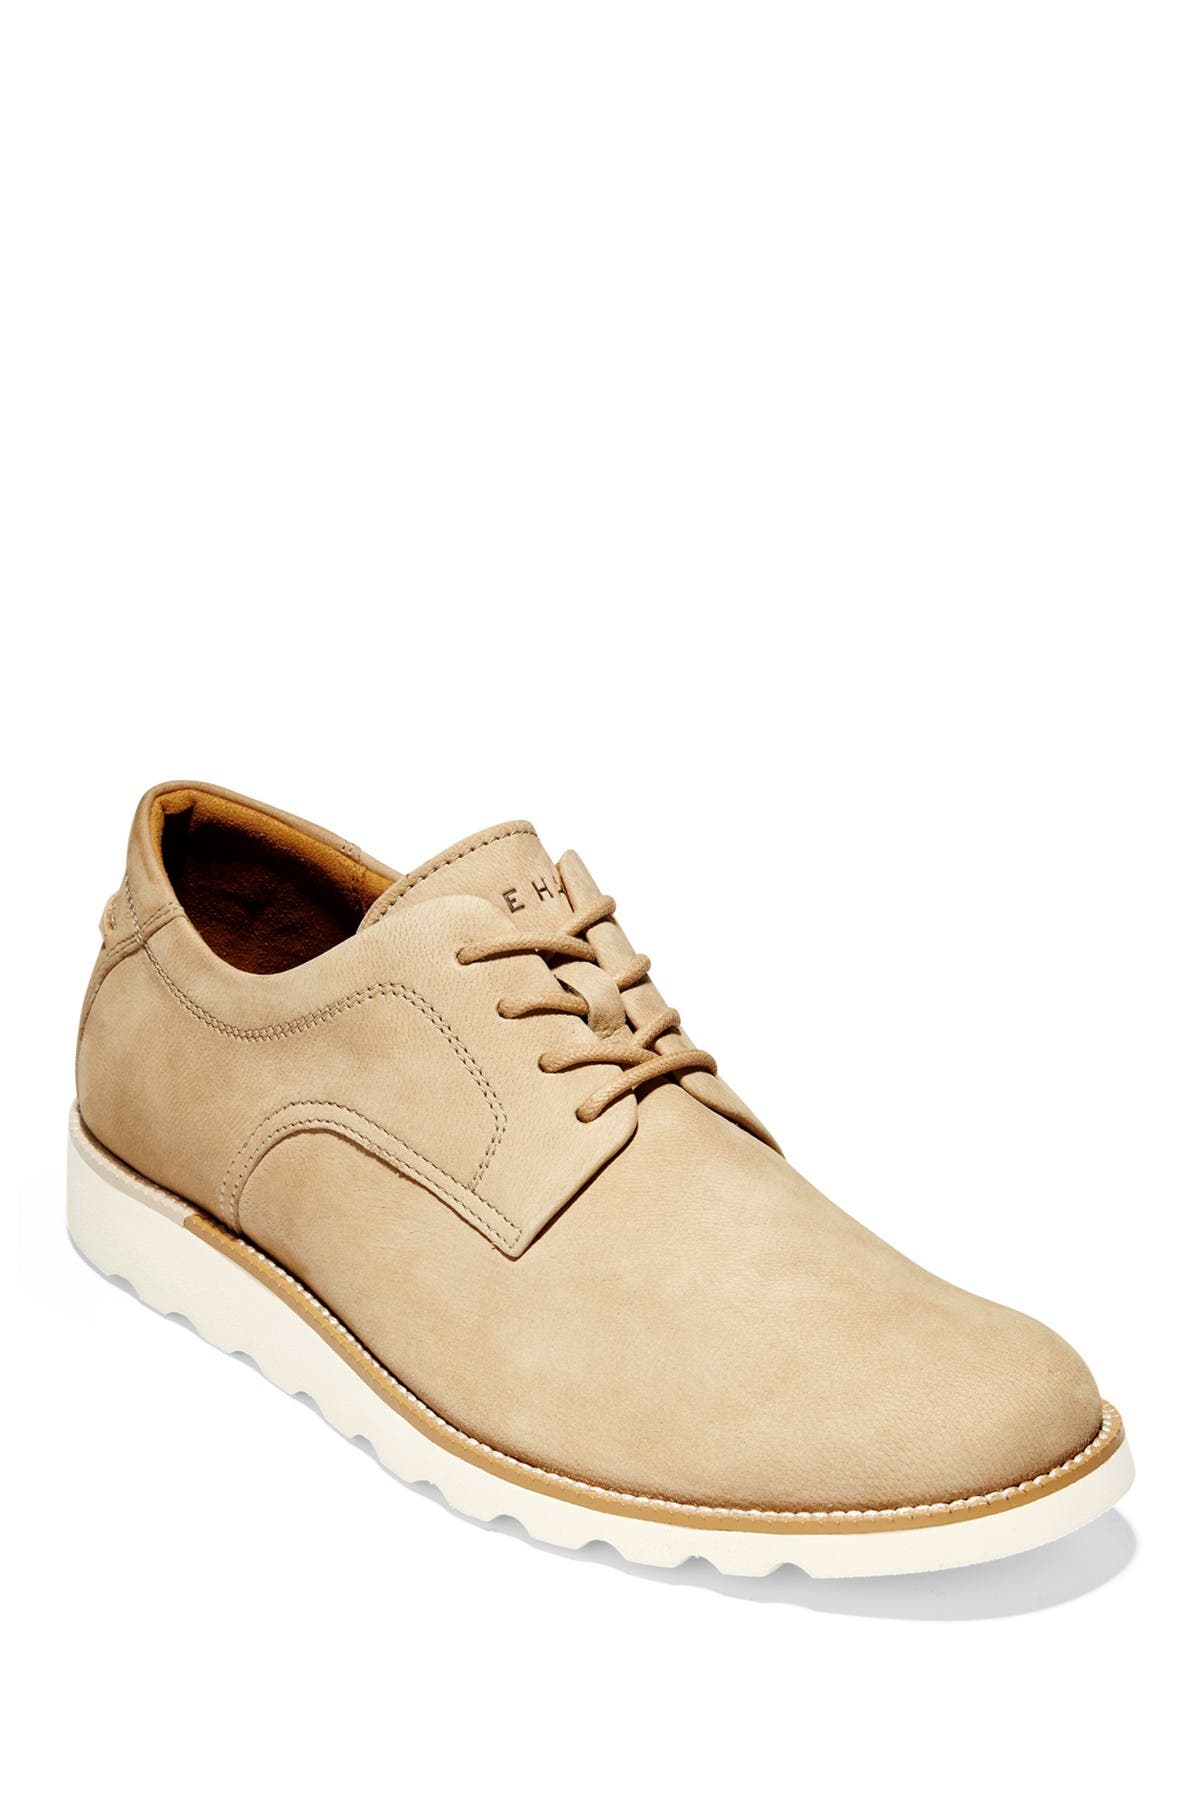 cole haan suede oxford